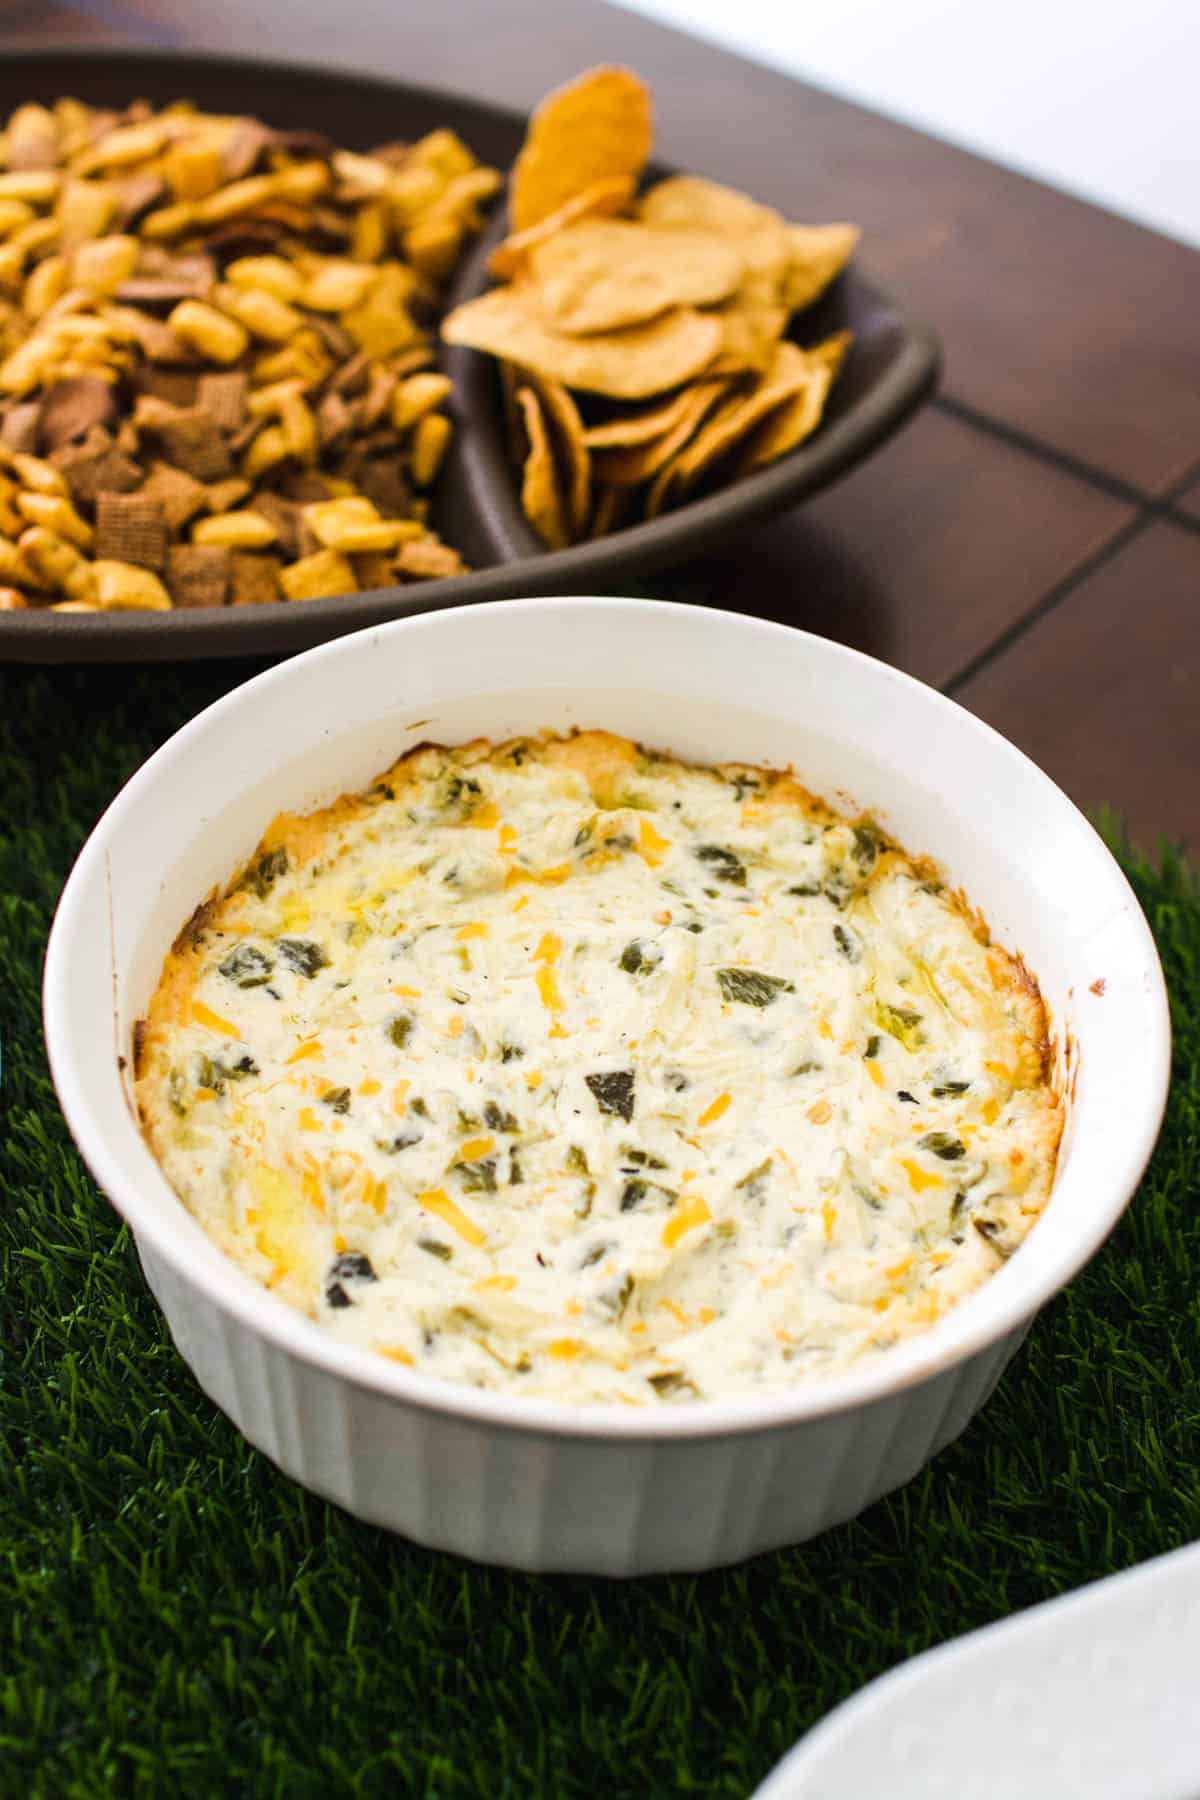 Cream cheese dip in a baking dish on a table next to a platter of chips.